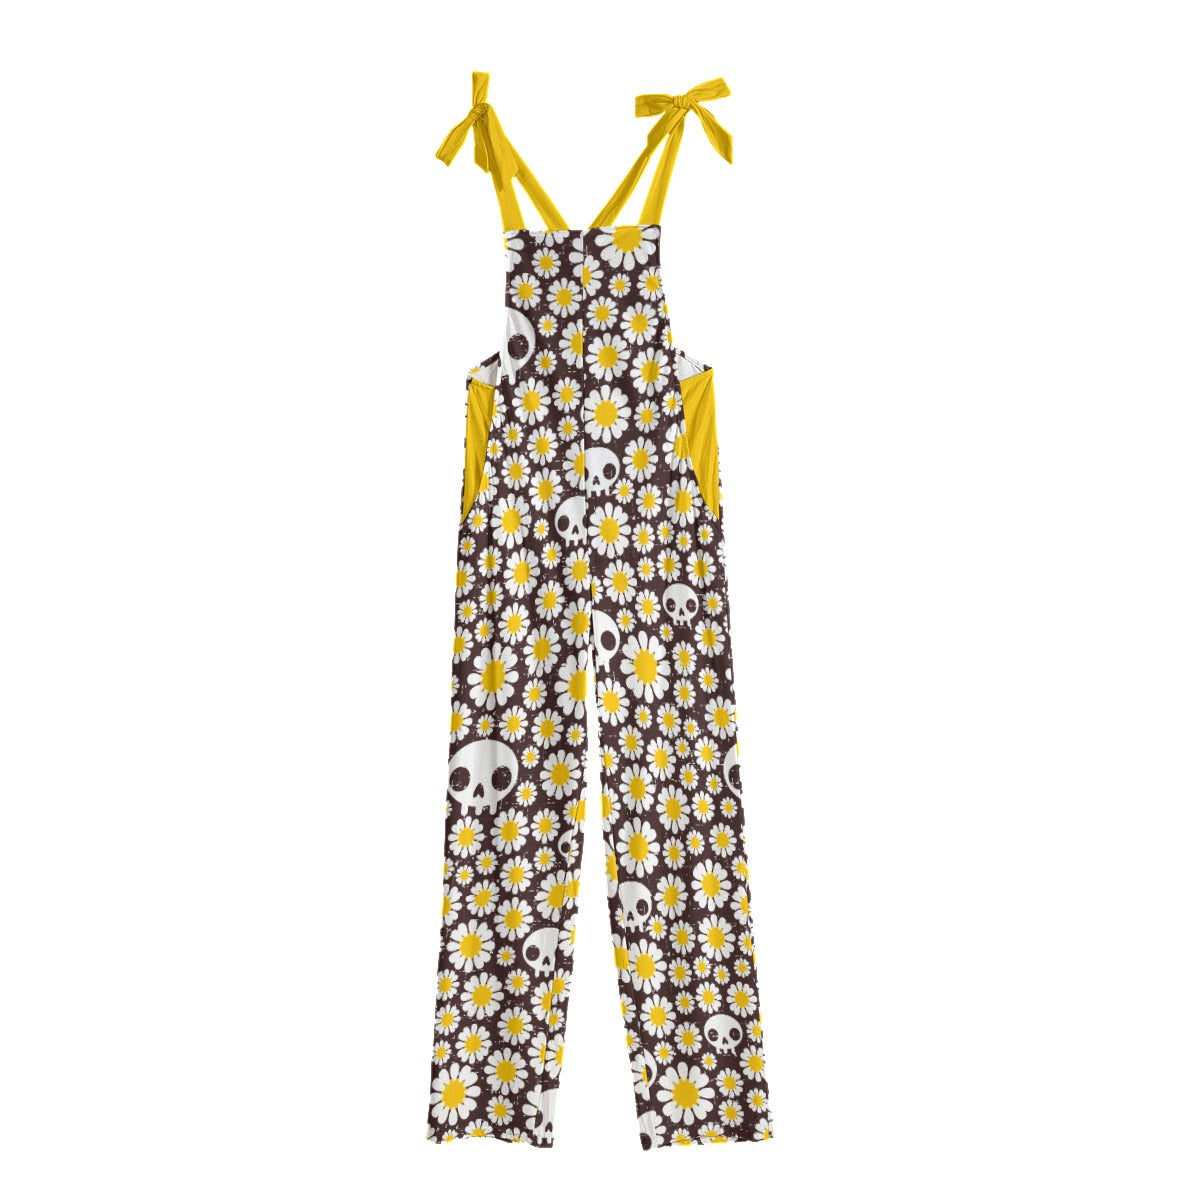 No Daisy Overall Jumpsuit